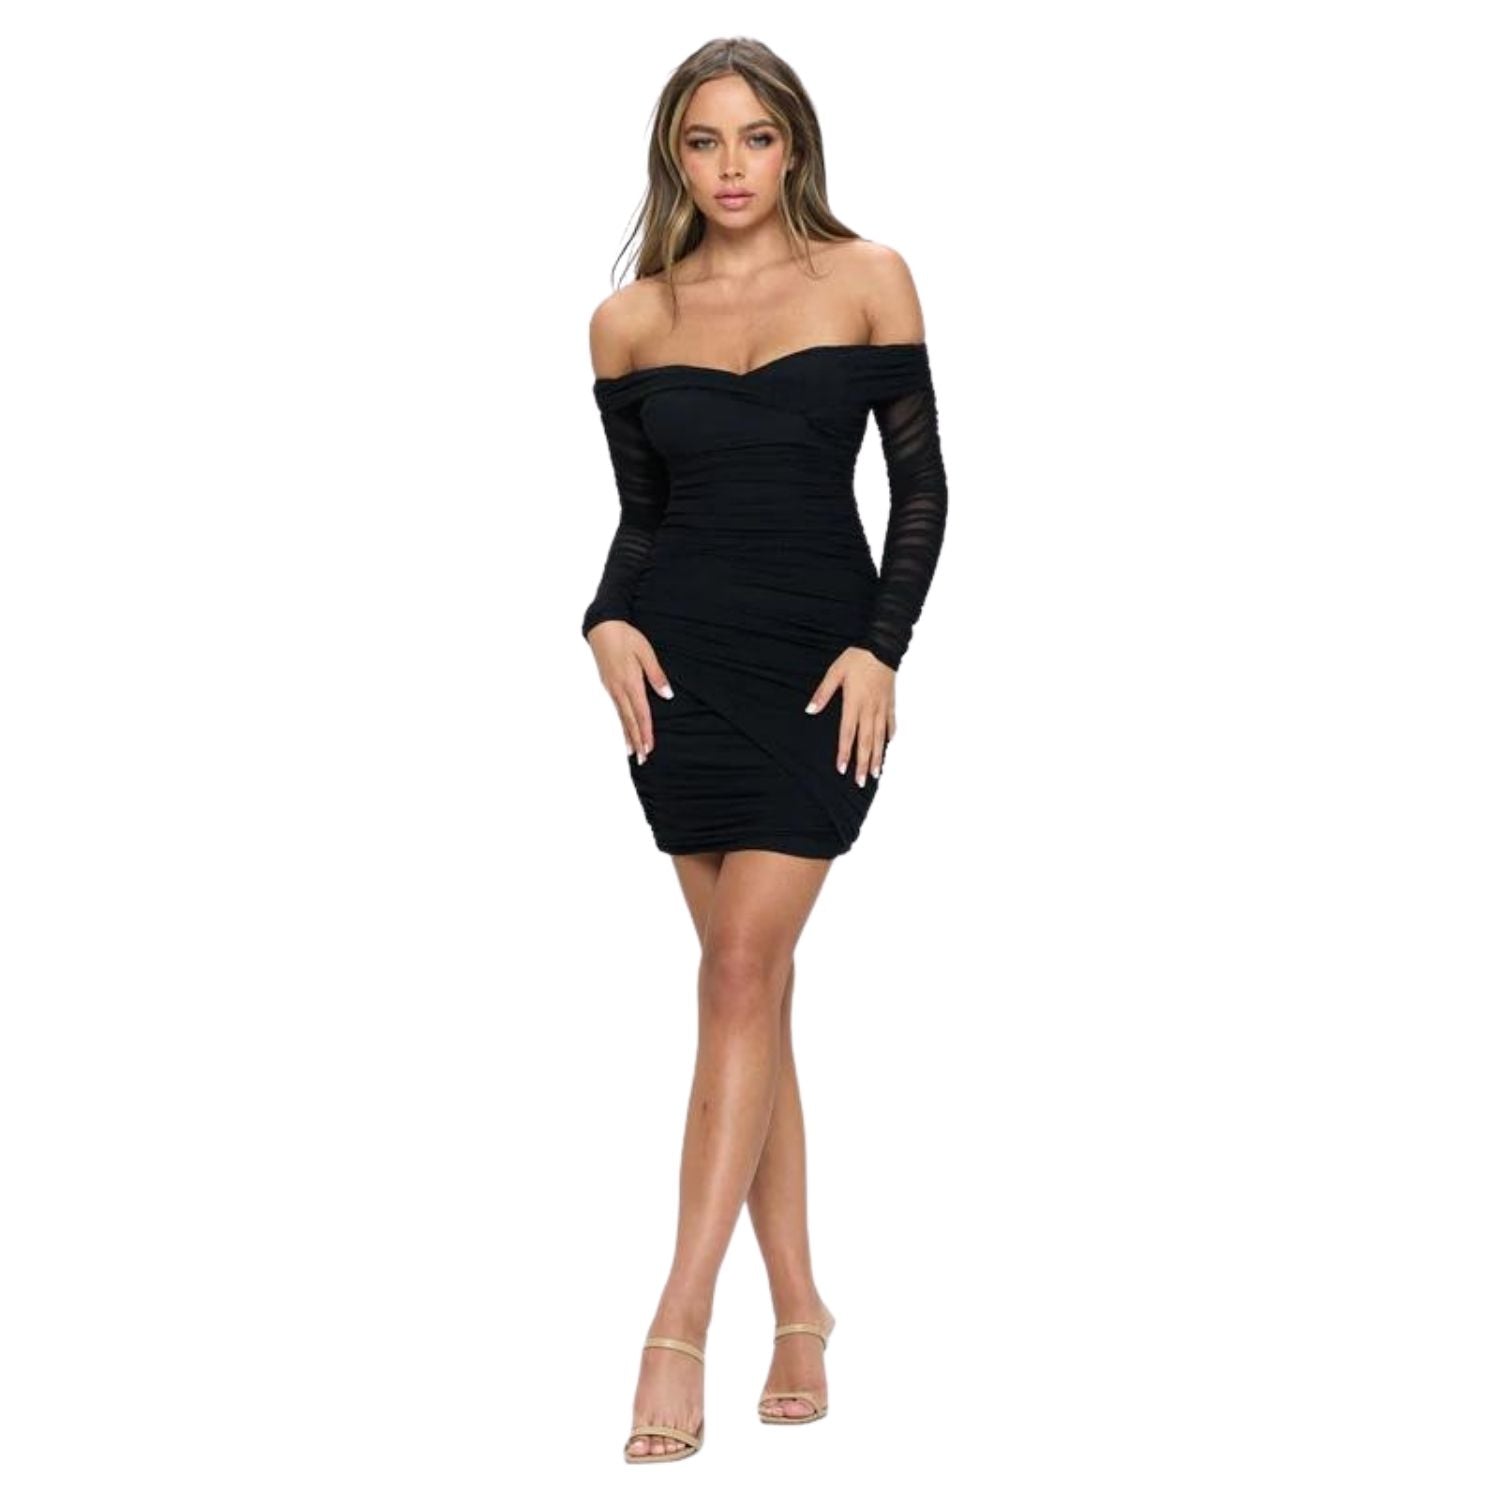 Black Ruched mesh off the shoulder bodycon mini dress with long sleeves, an asymmetrical cut, and back invisible zipper.